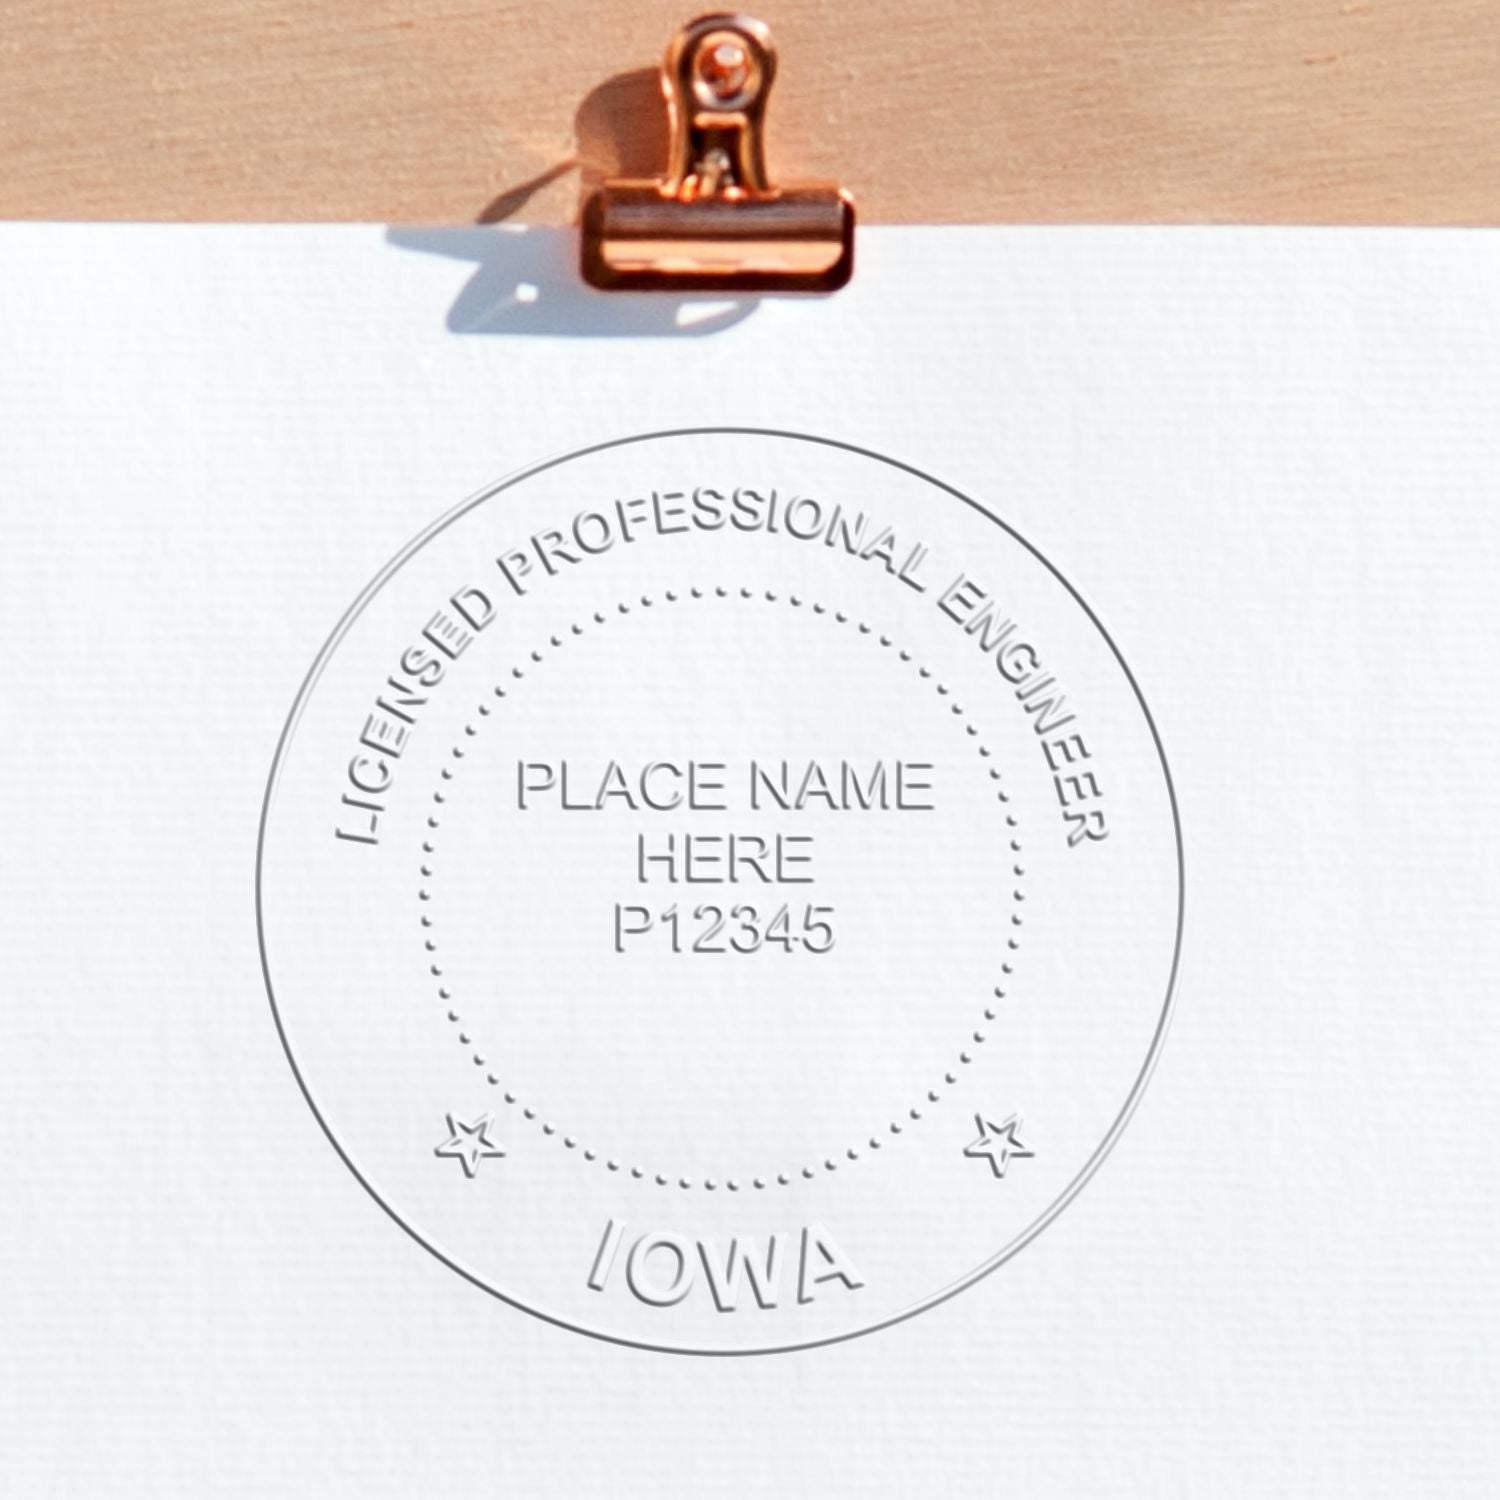 The Heavy Duty Cast Iron Iowa Engineer Seal Embosser stamp impression comes to life with a crisp, detailed photo on paper - showcasing true professional quality.